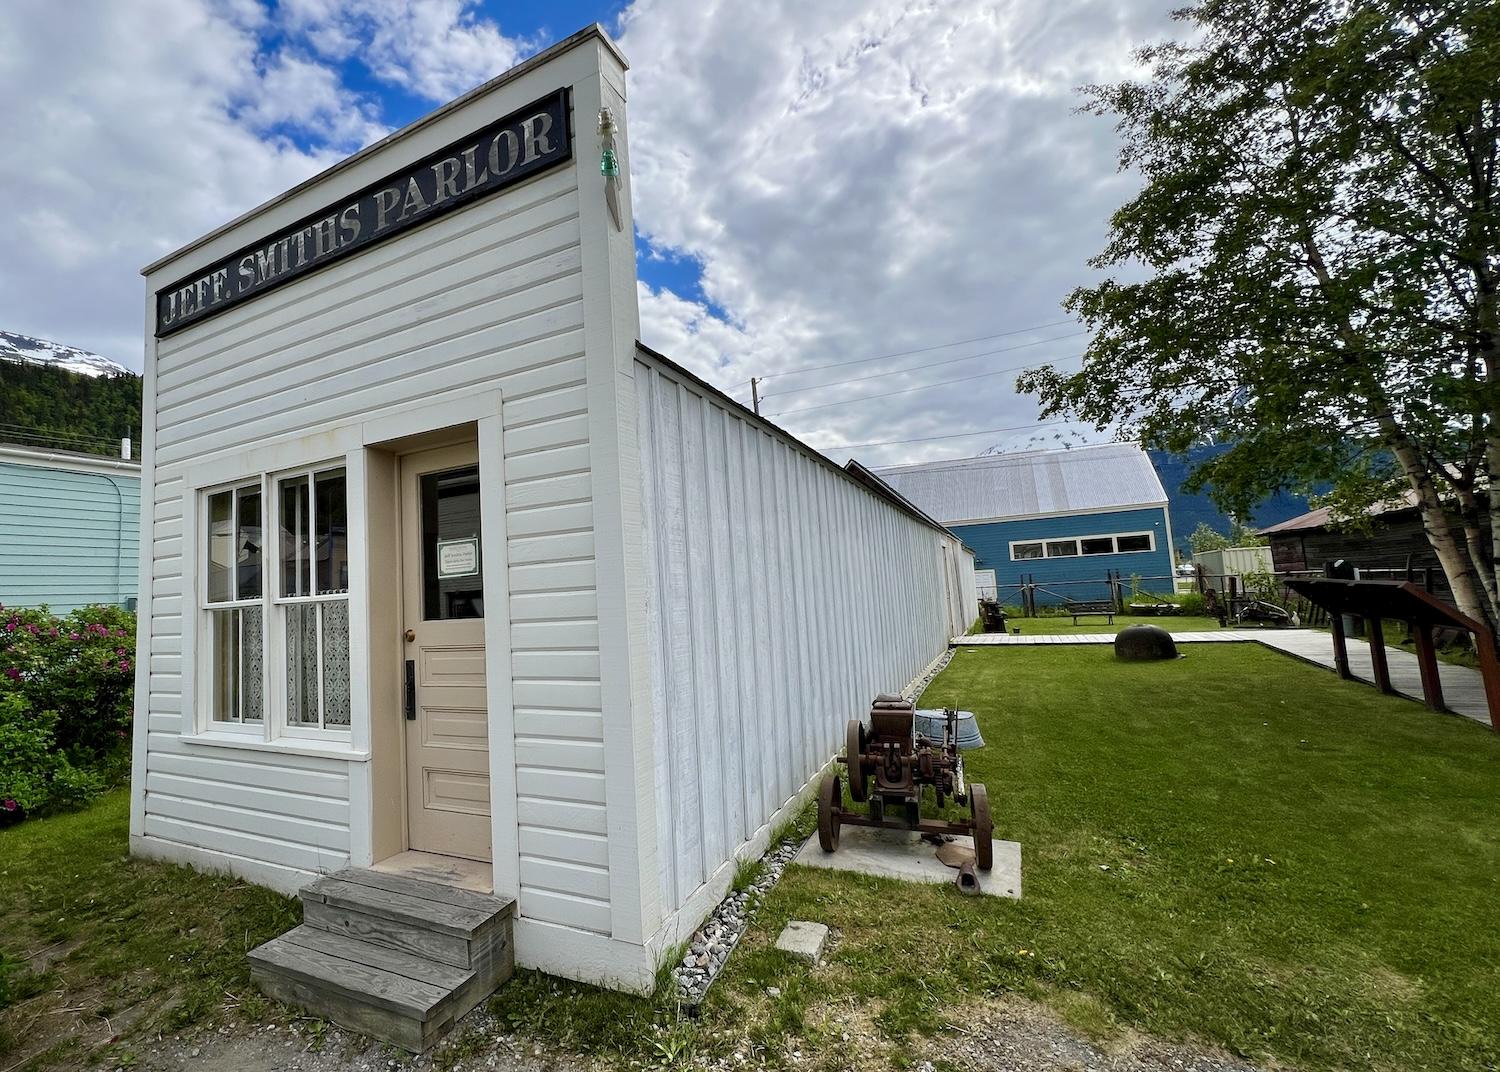 The NPS only offers guided tours of the Jeff. Smiths Parlor Museum in Skagway. It's connected to a notorious outlaw.